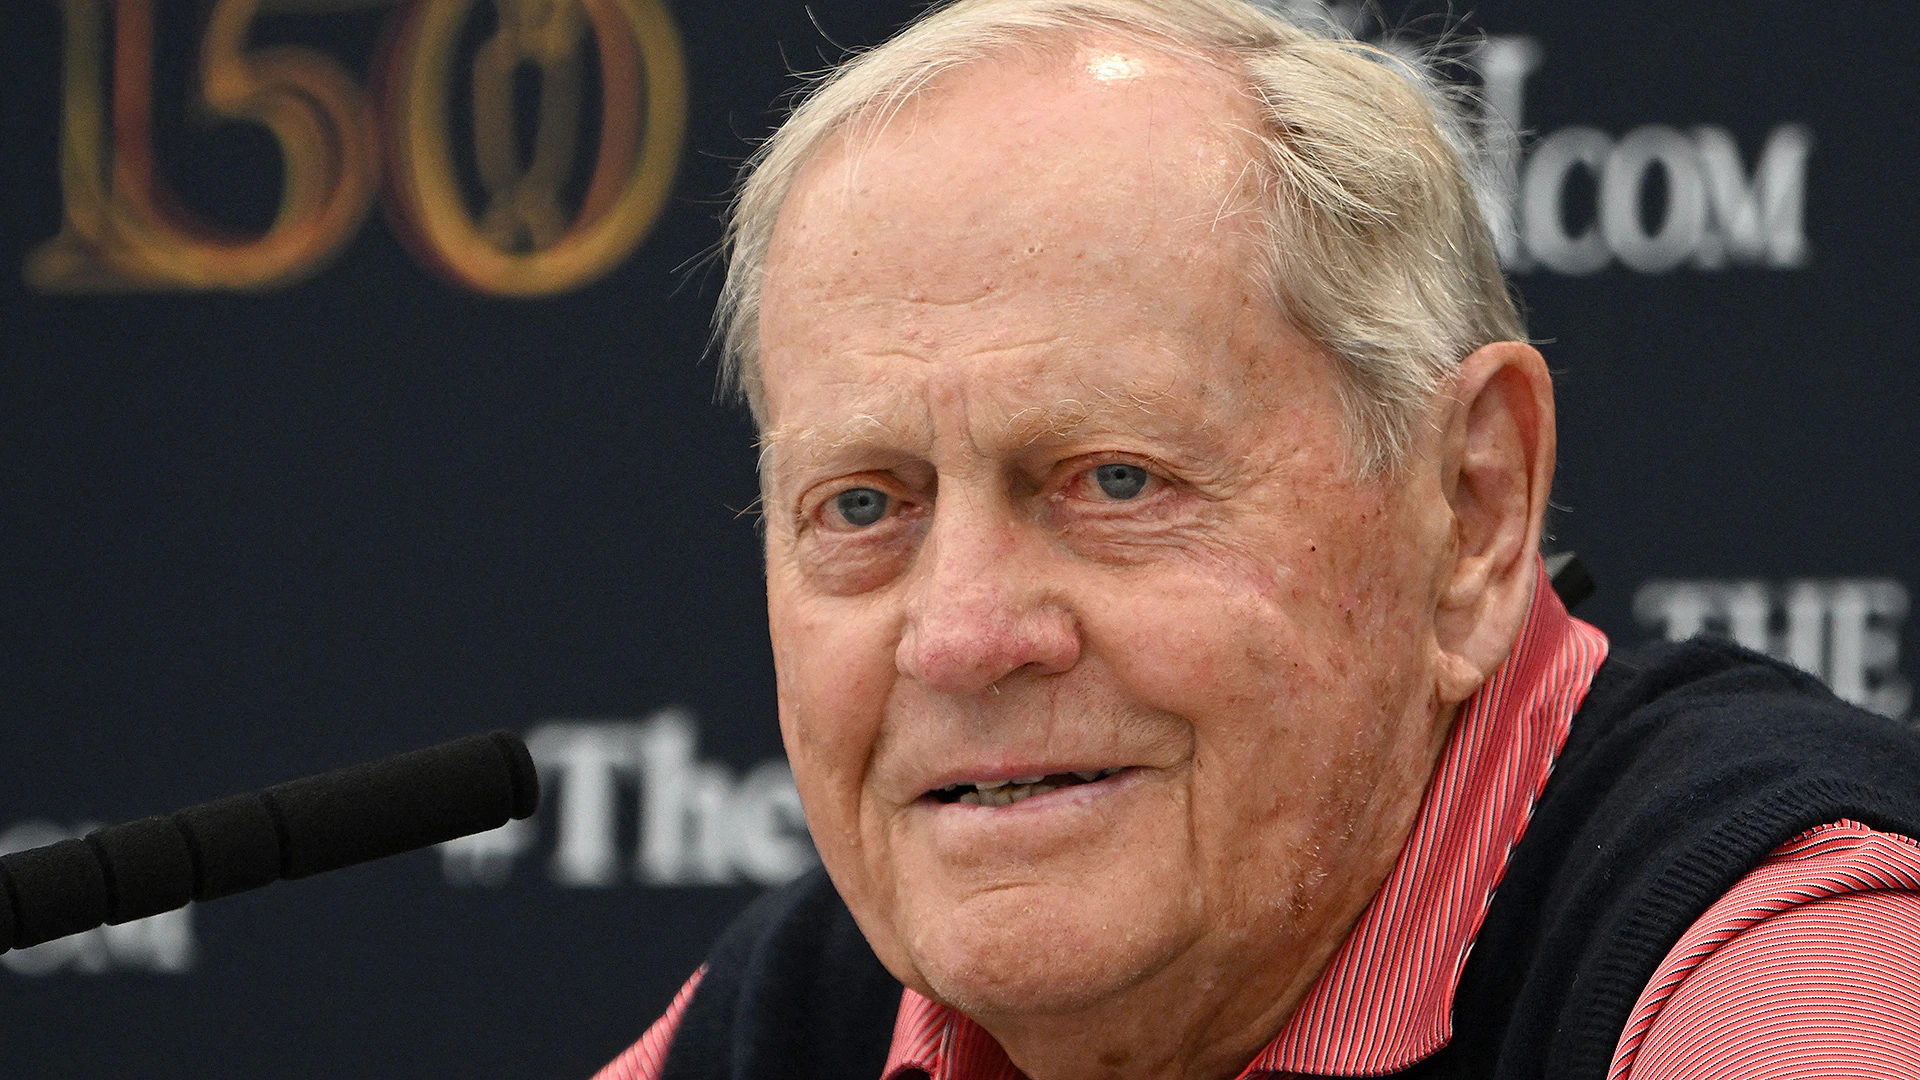 2022 British Open: Jack Nicklaus returns to St. Andrews to receive honorary citizenship